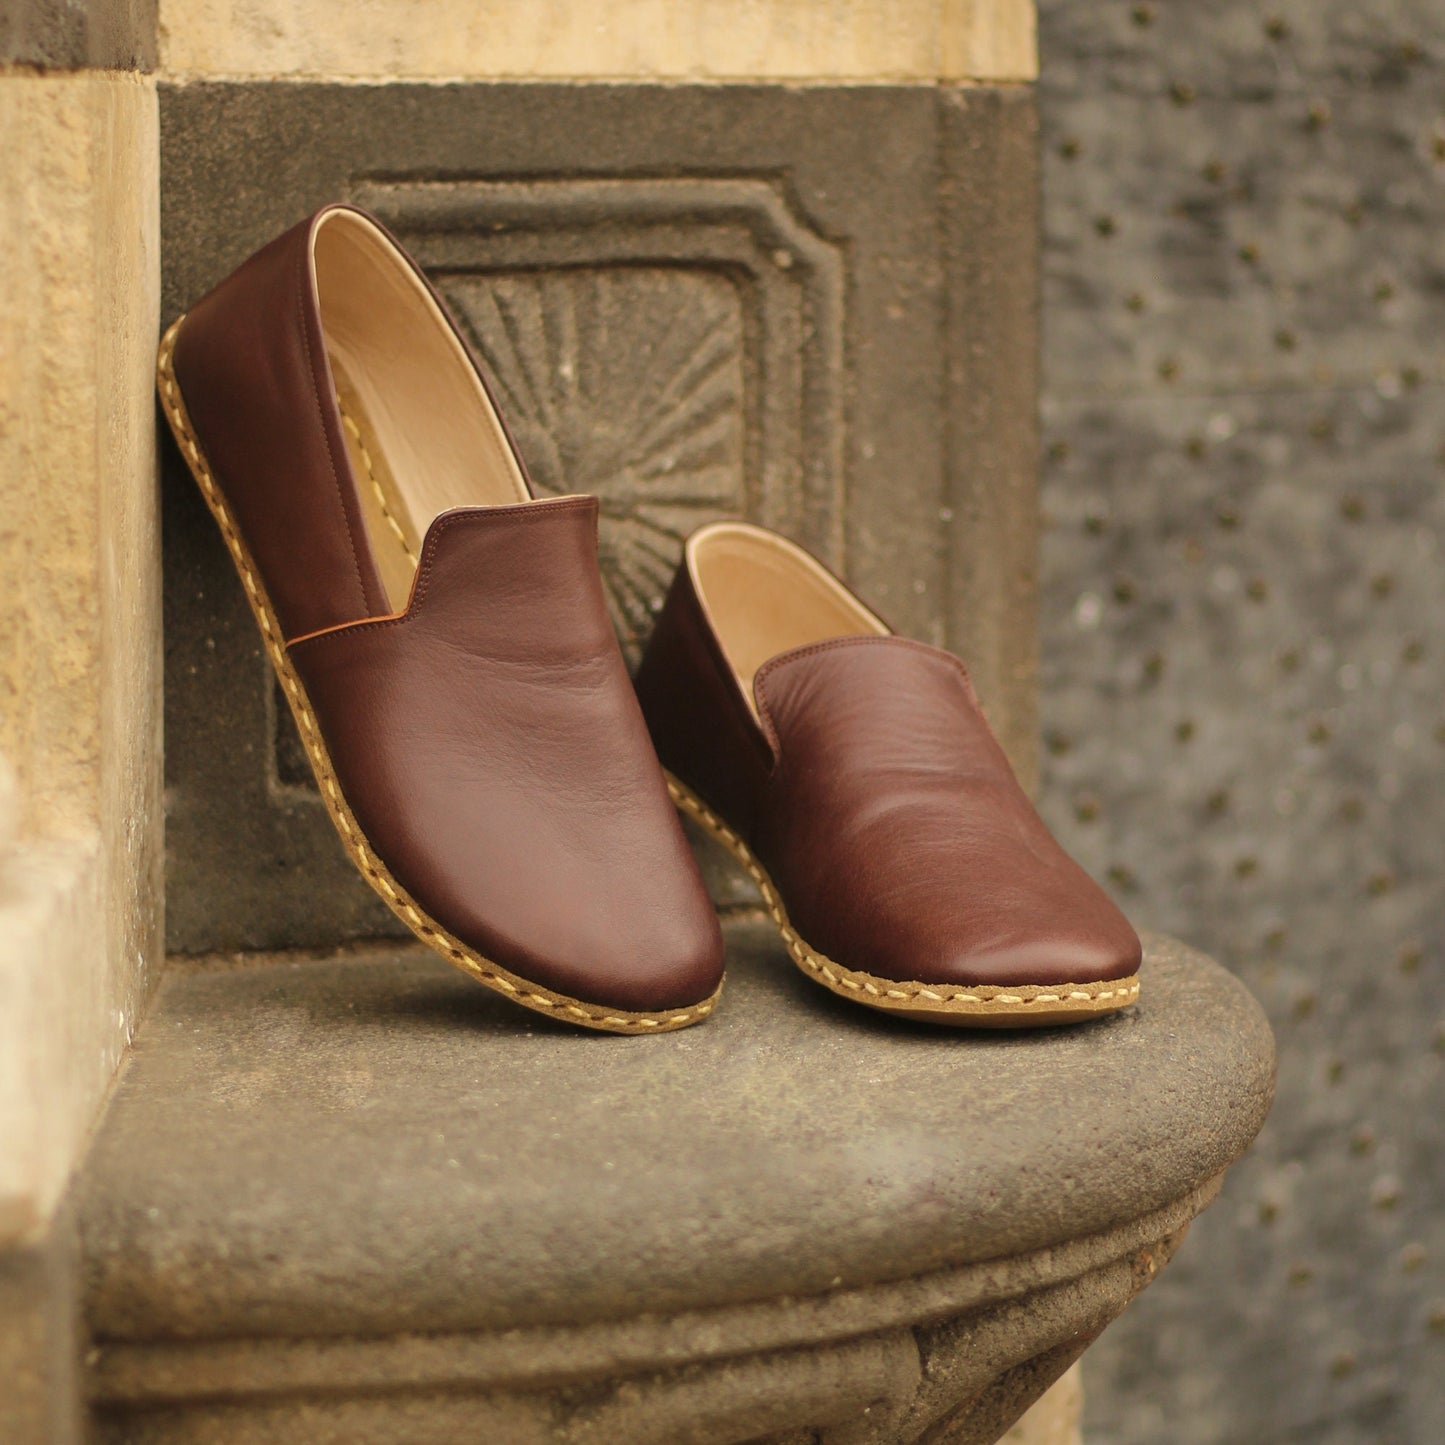 Men Barefoot Shoes, Handmade, Brown Leather Shoes